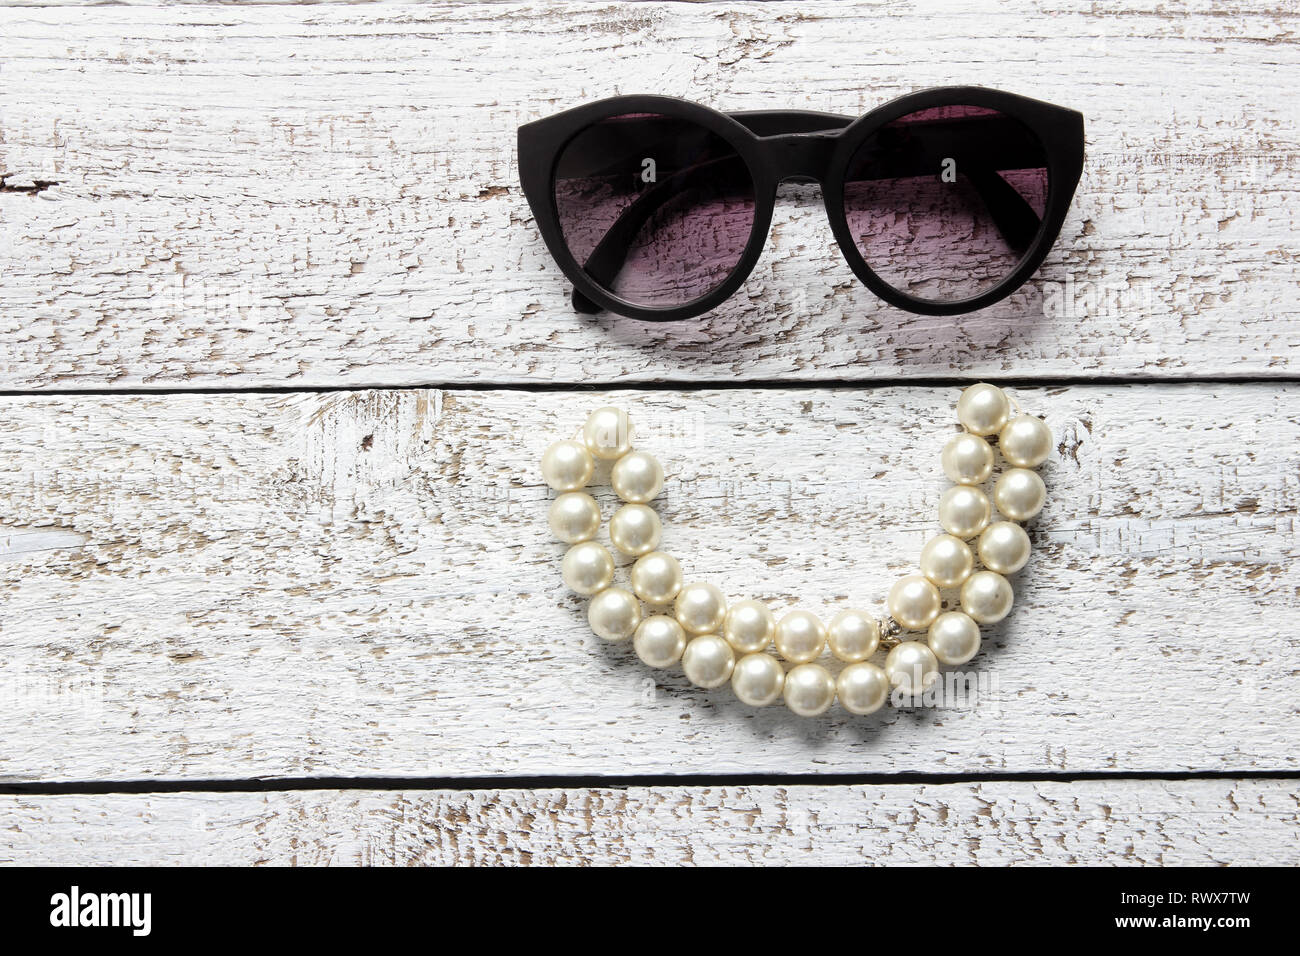 Sunglasses and Pearl Necklace on Wooden Background Stock Photo - Alamy